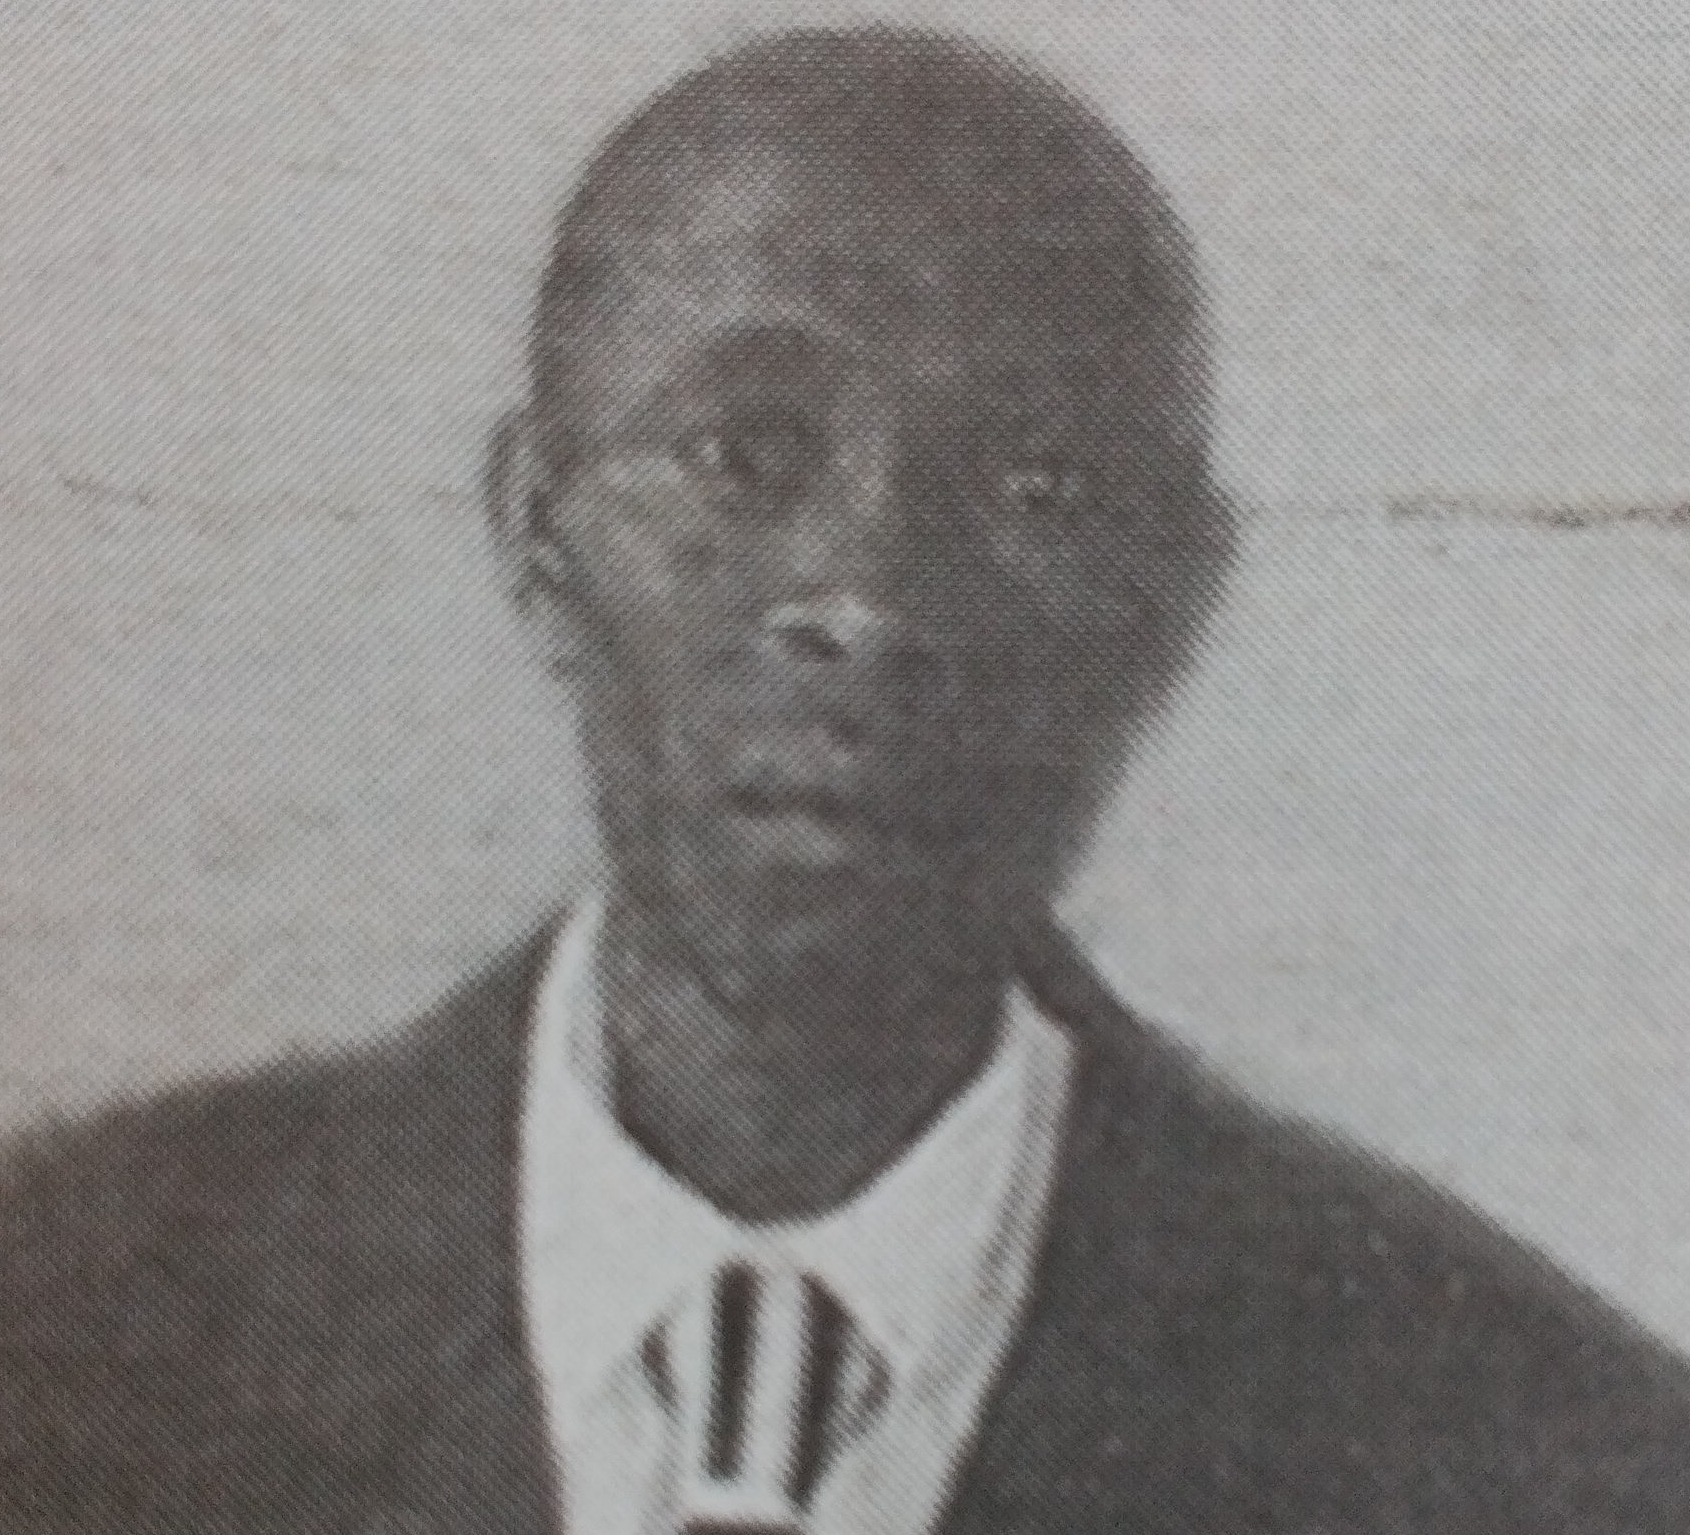 Obituary Image of Peter Muthee Muriithi